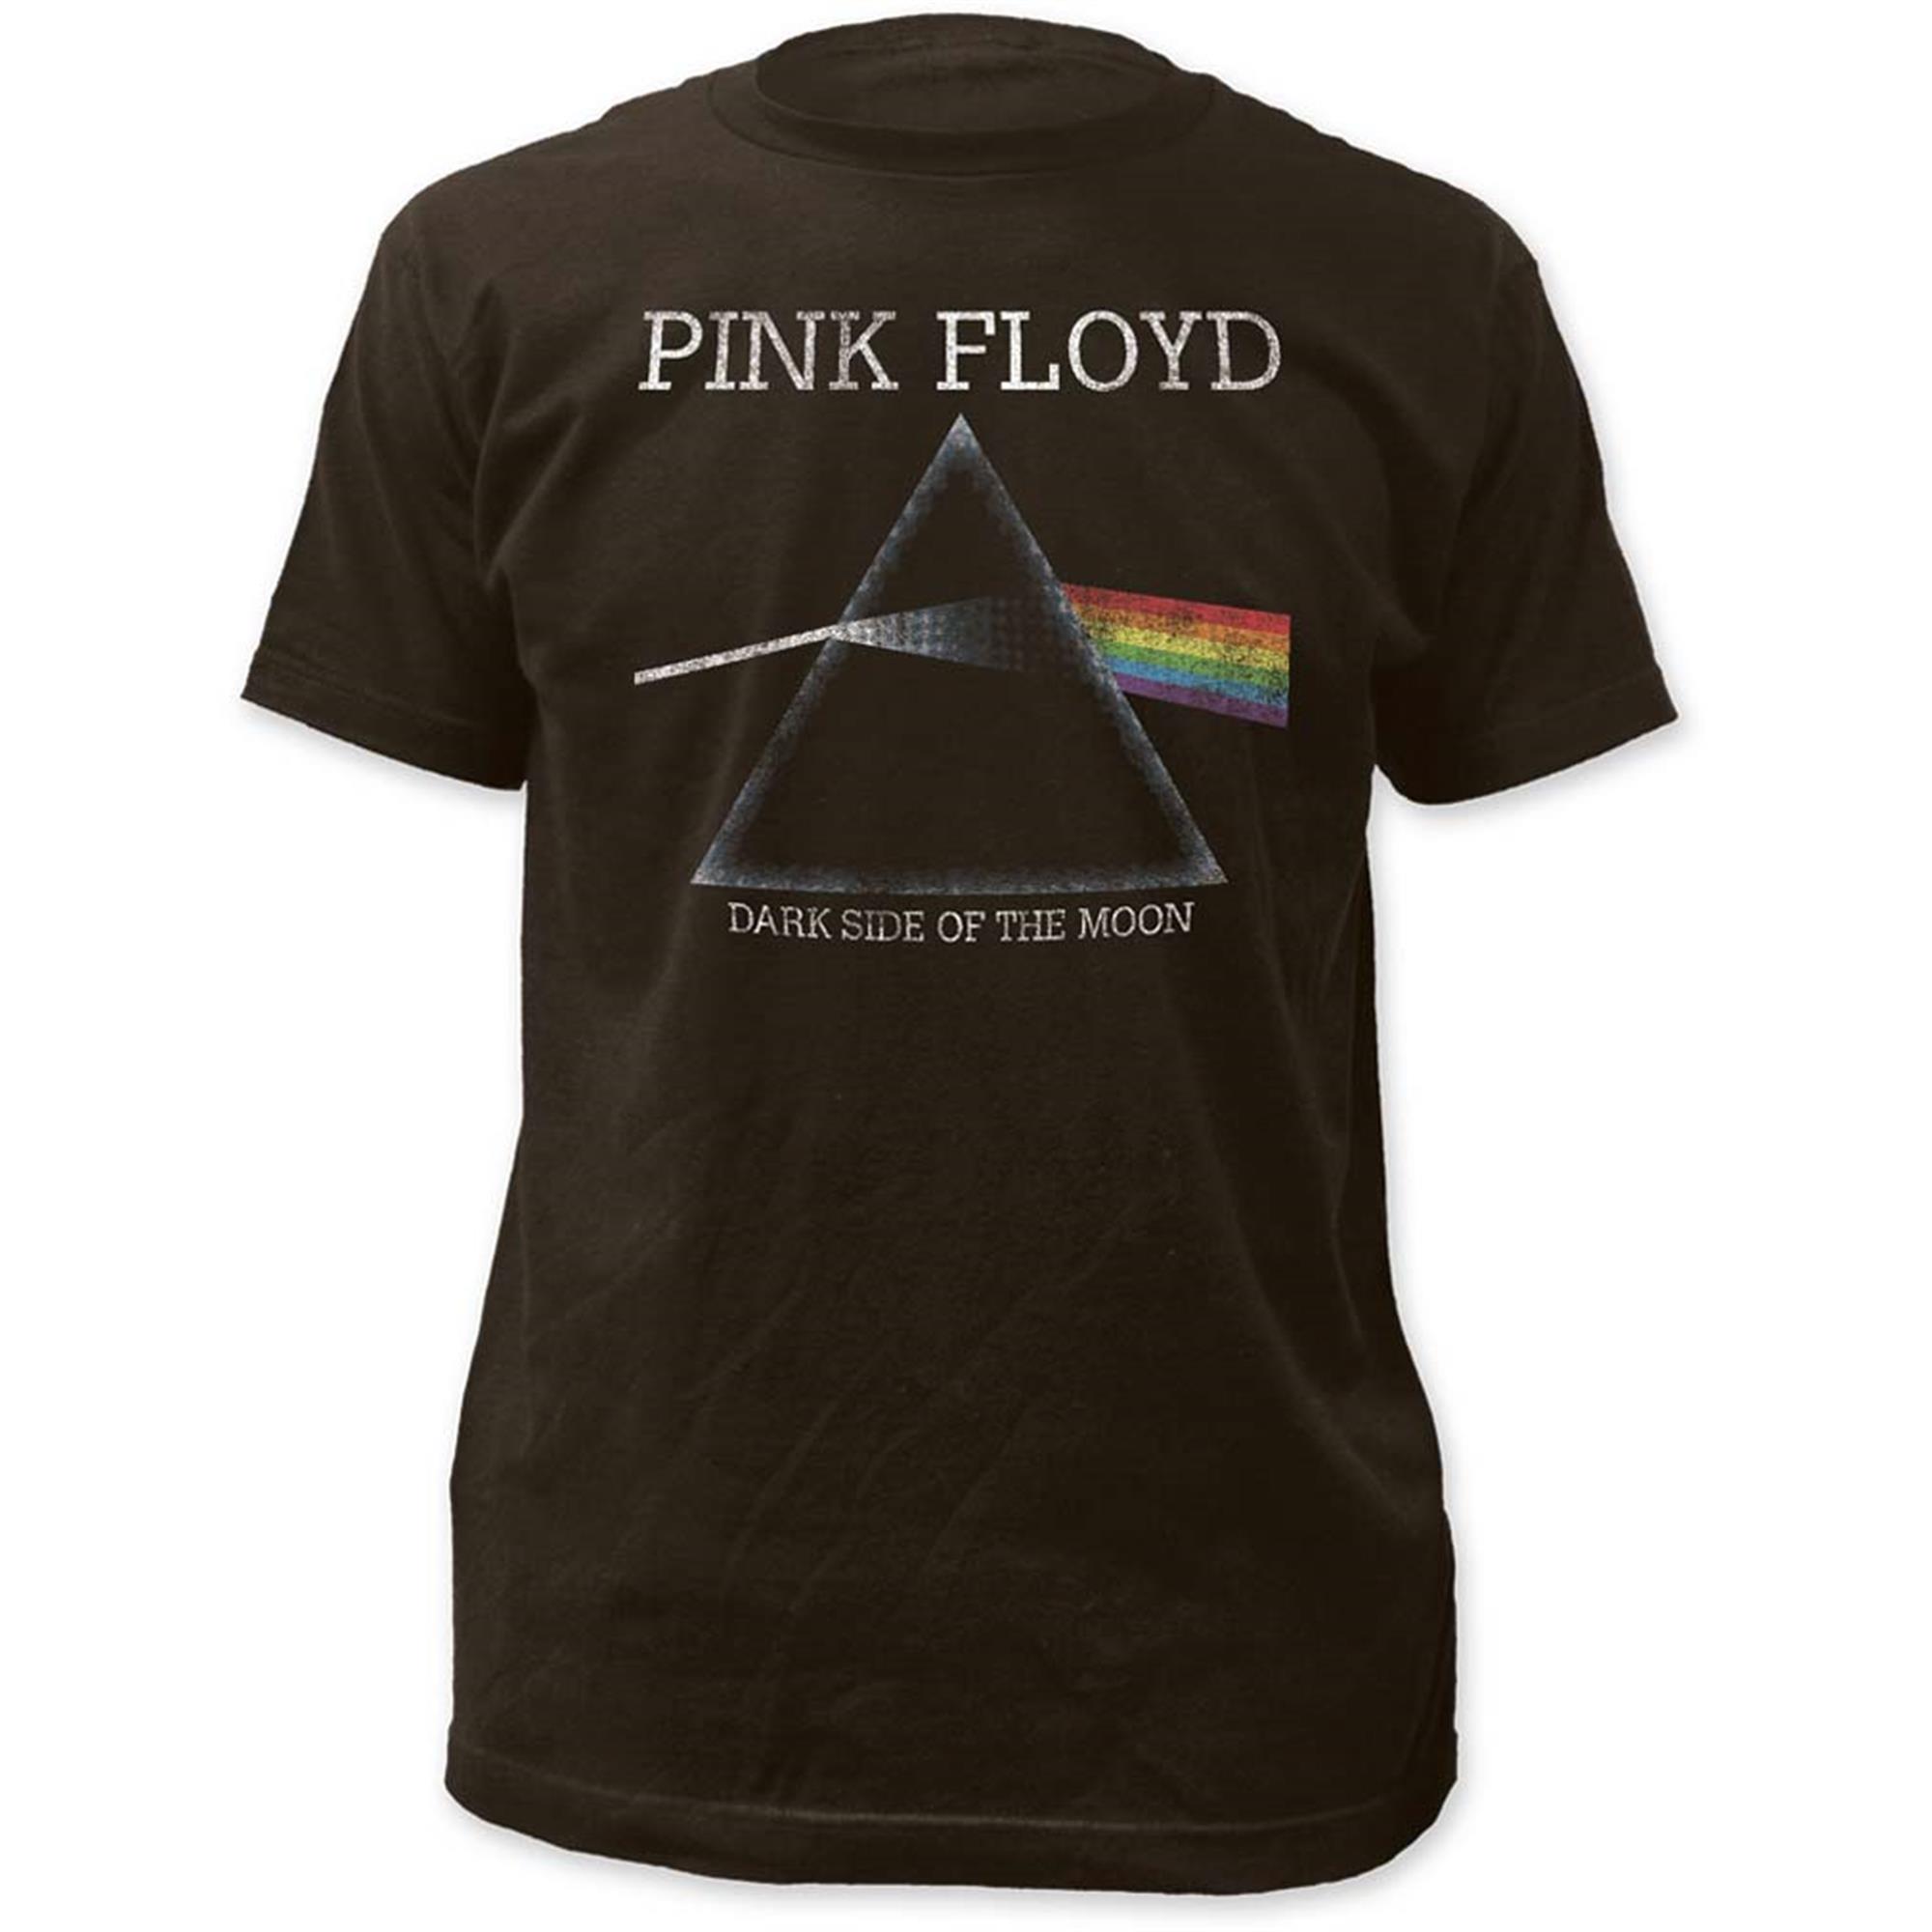 Pink Floyd Dark Side Of The Moon Distressed Fitted T-Shirt